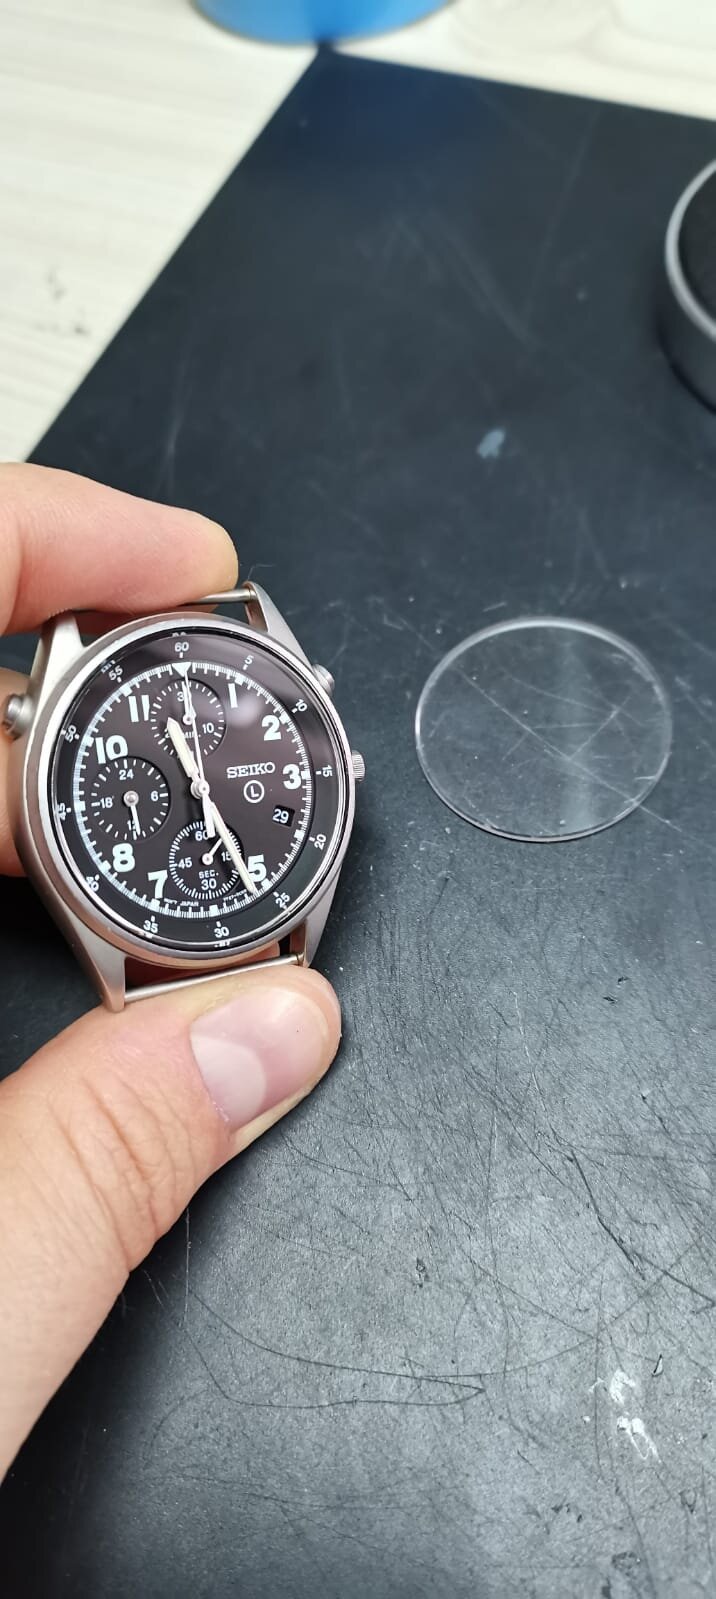 Vintage SEIKO Military watch repair 7T27-7A20 076875 in for battery, reseal  and a new glass from Old Coulsdon, Surrey. | Watches Fixed | Watch Repairs  | Latest Watch News | Watch Hub